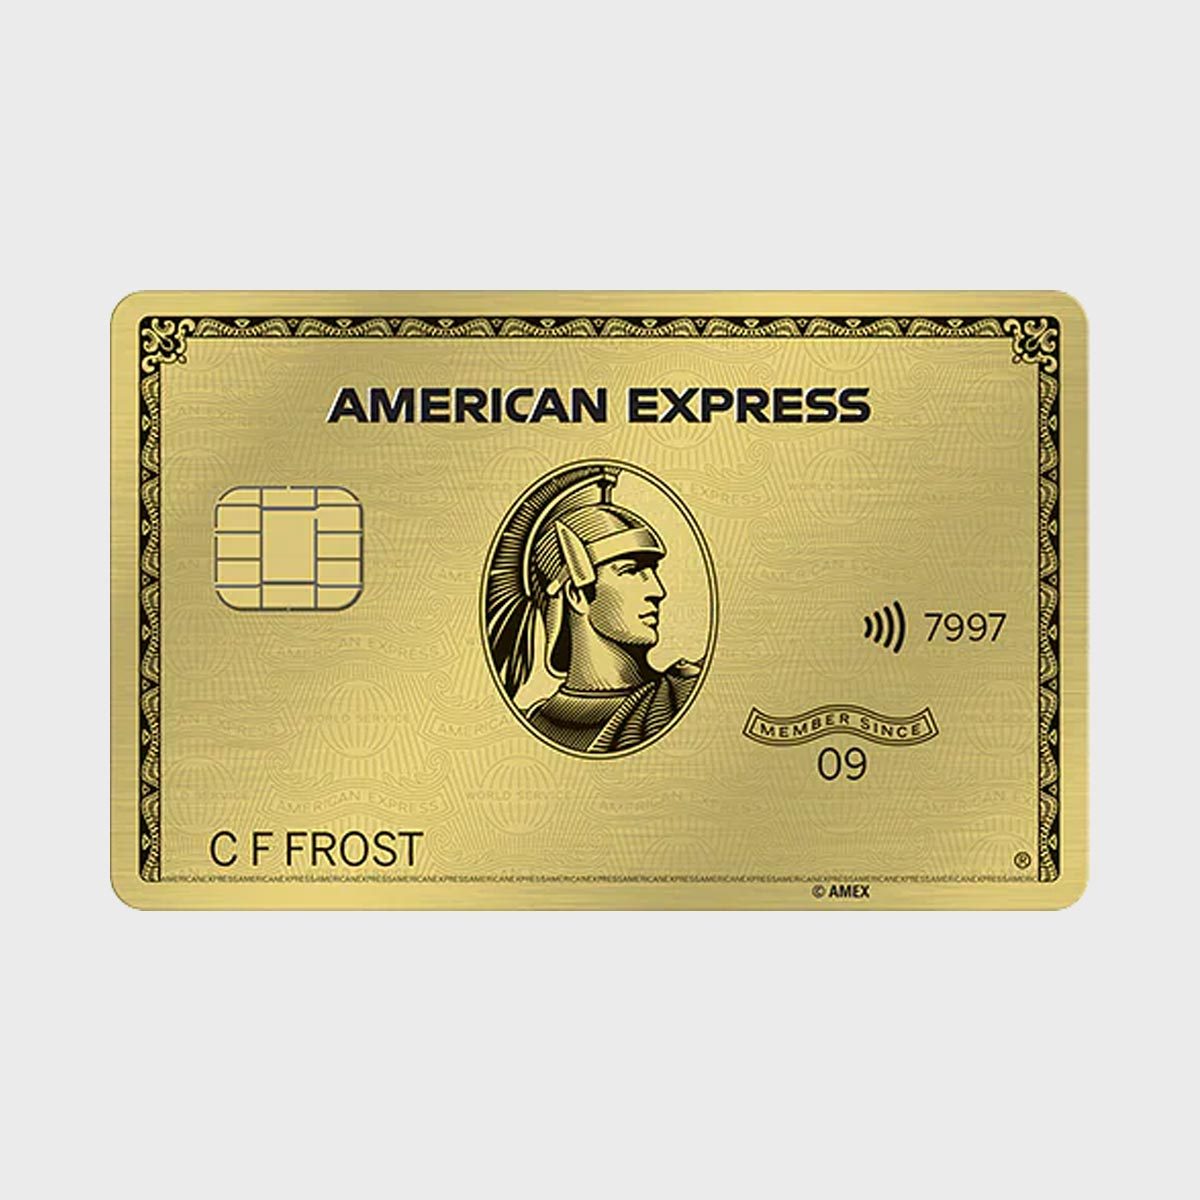 american express gold card travel medical insurance